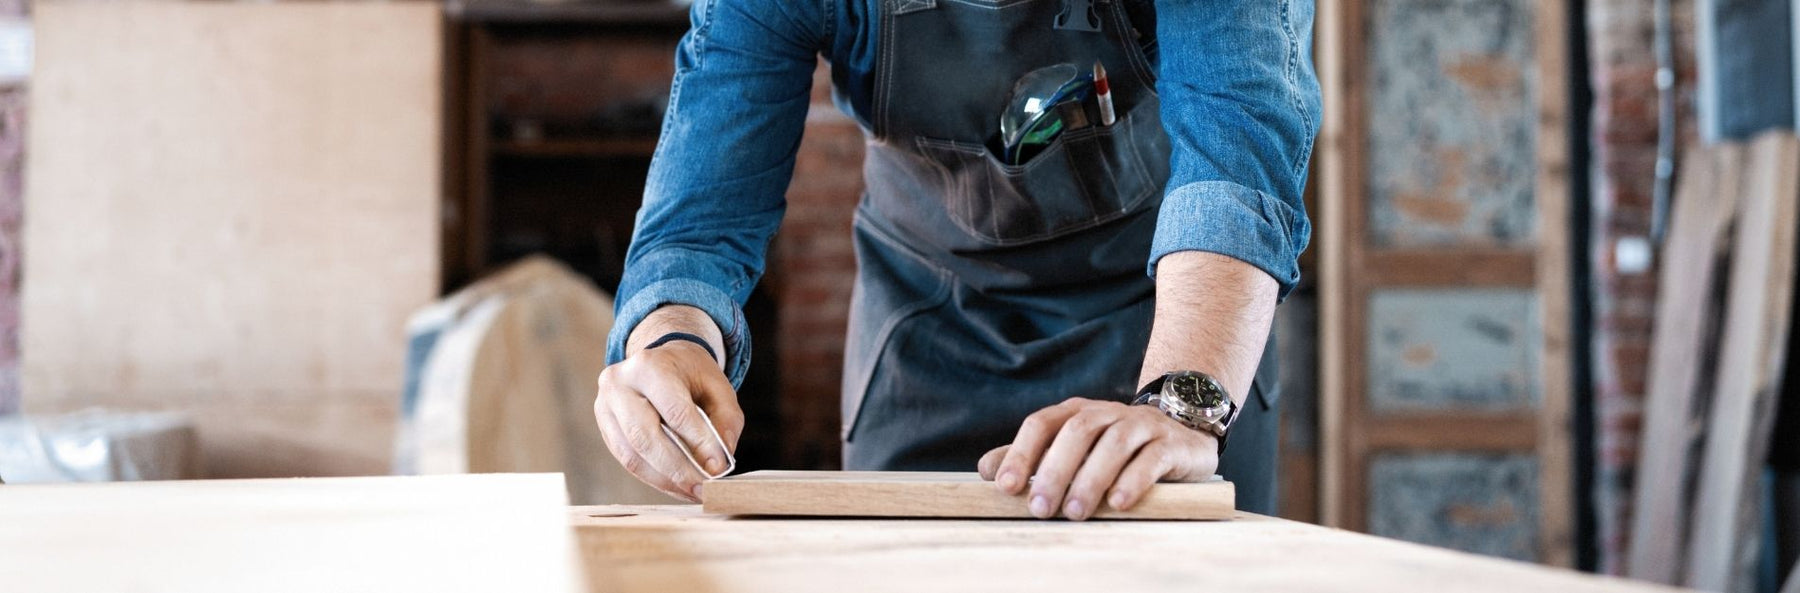 The Best Ways To Become a Better Woodworker